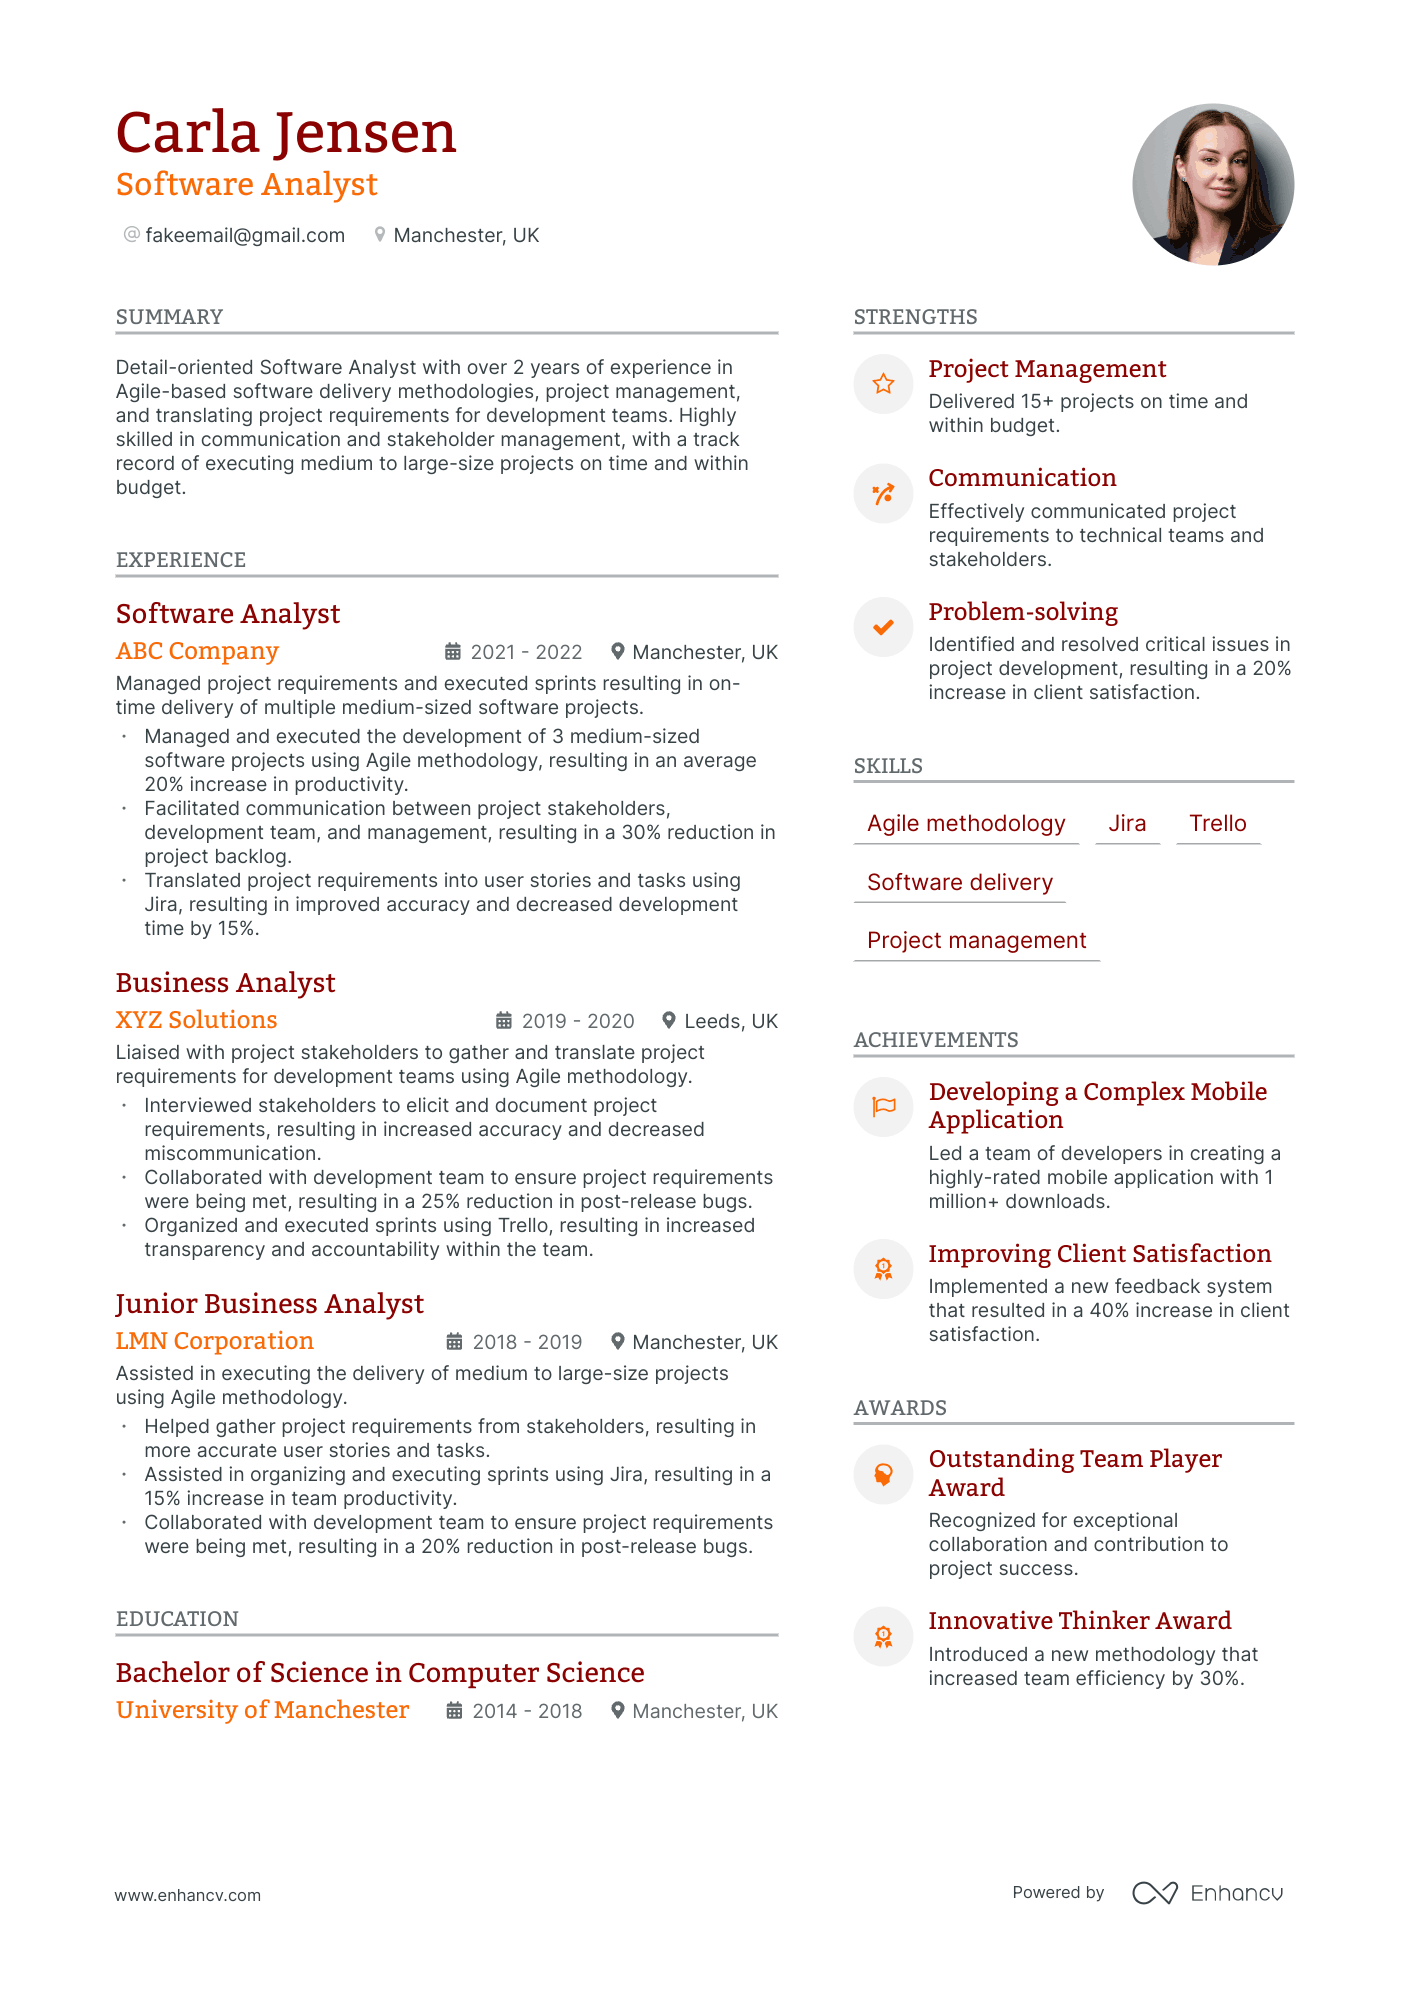 Software Analyst resume example